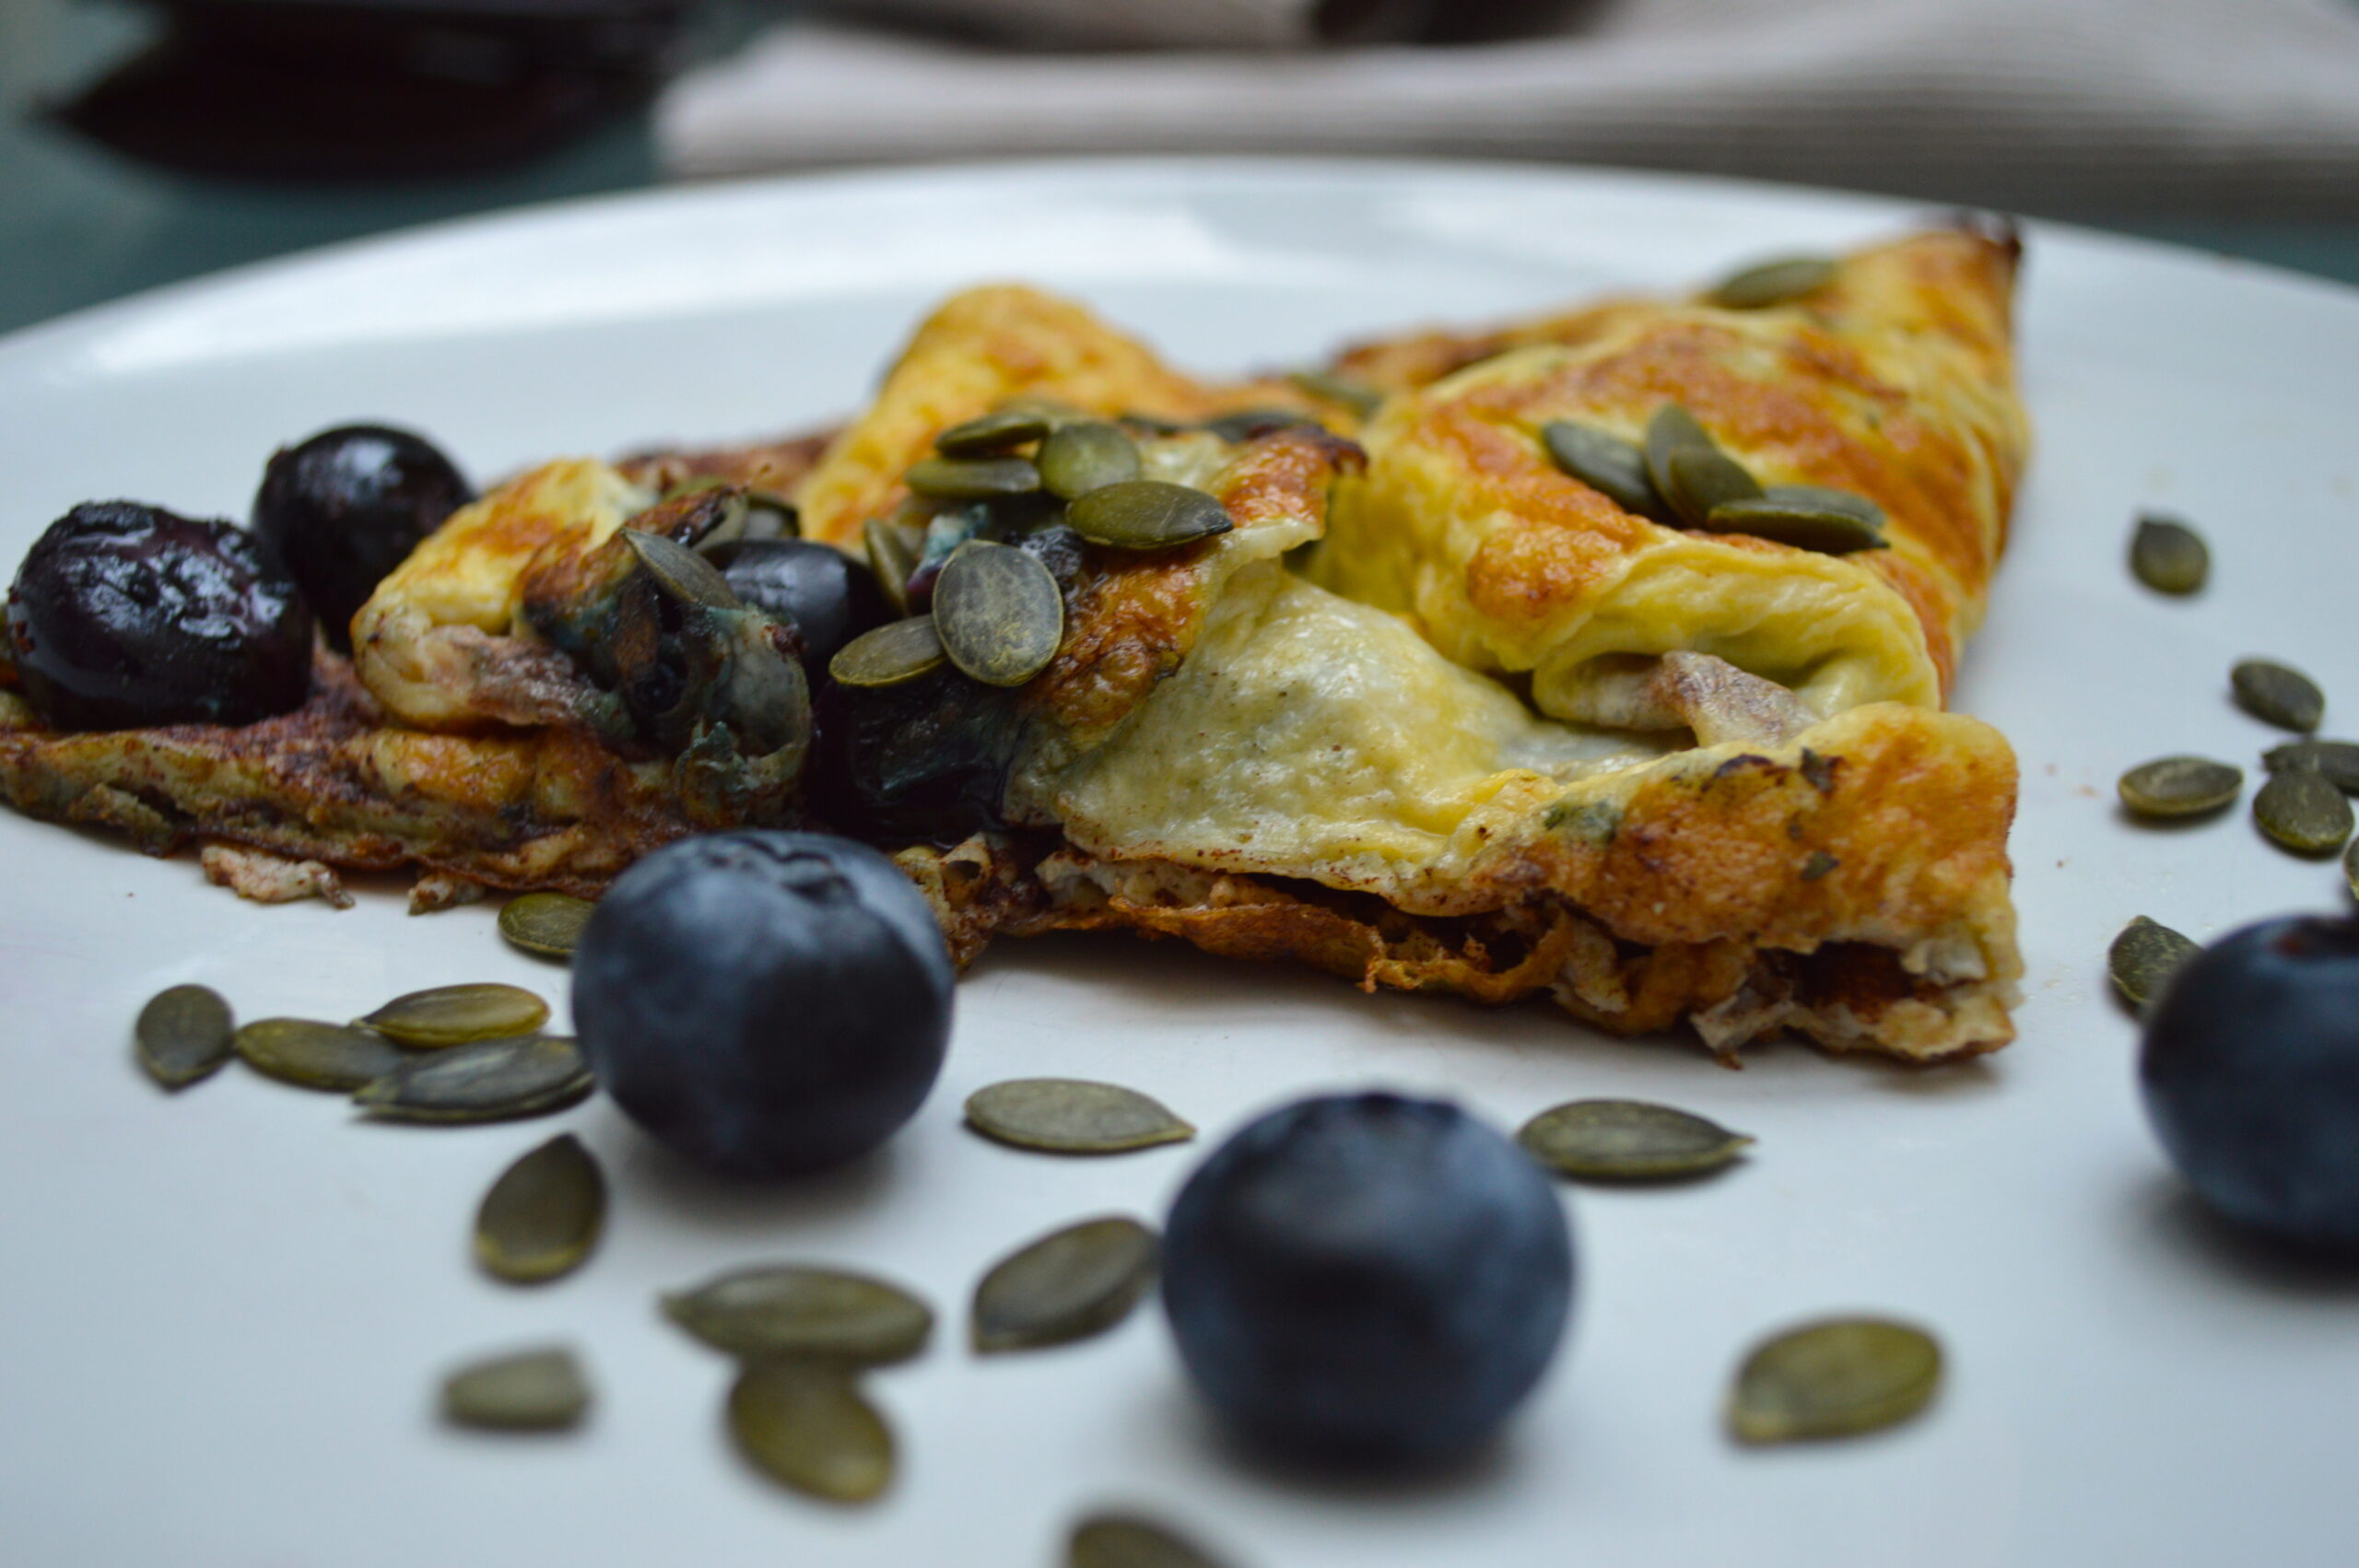 Blueberry and cinnamon omelette